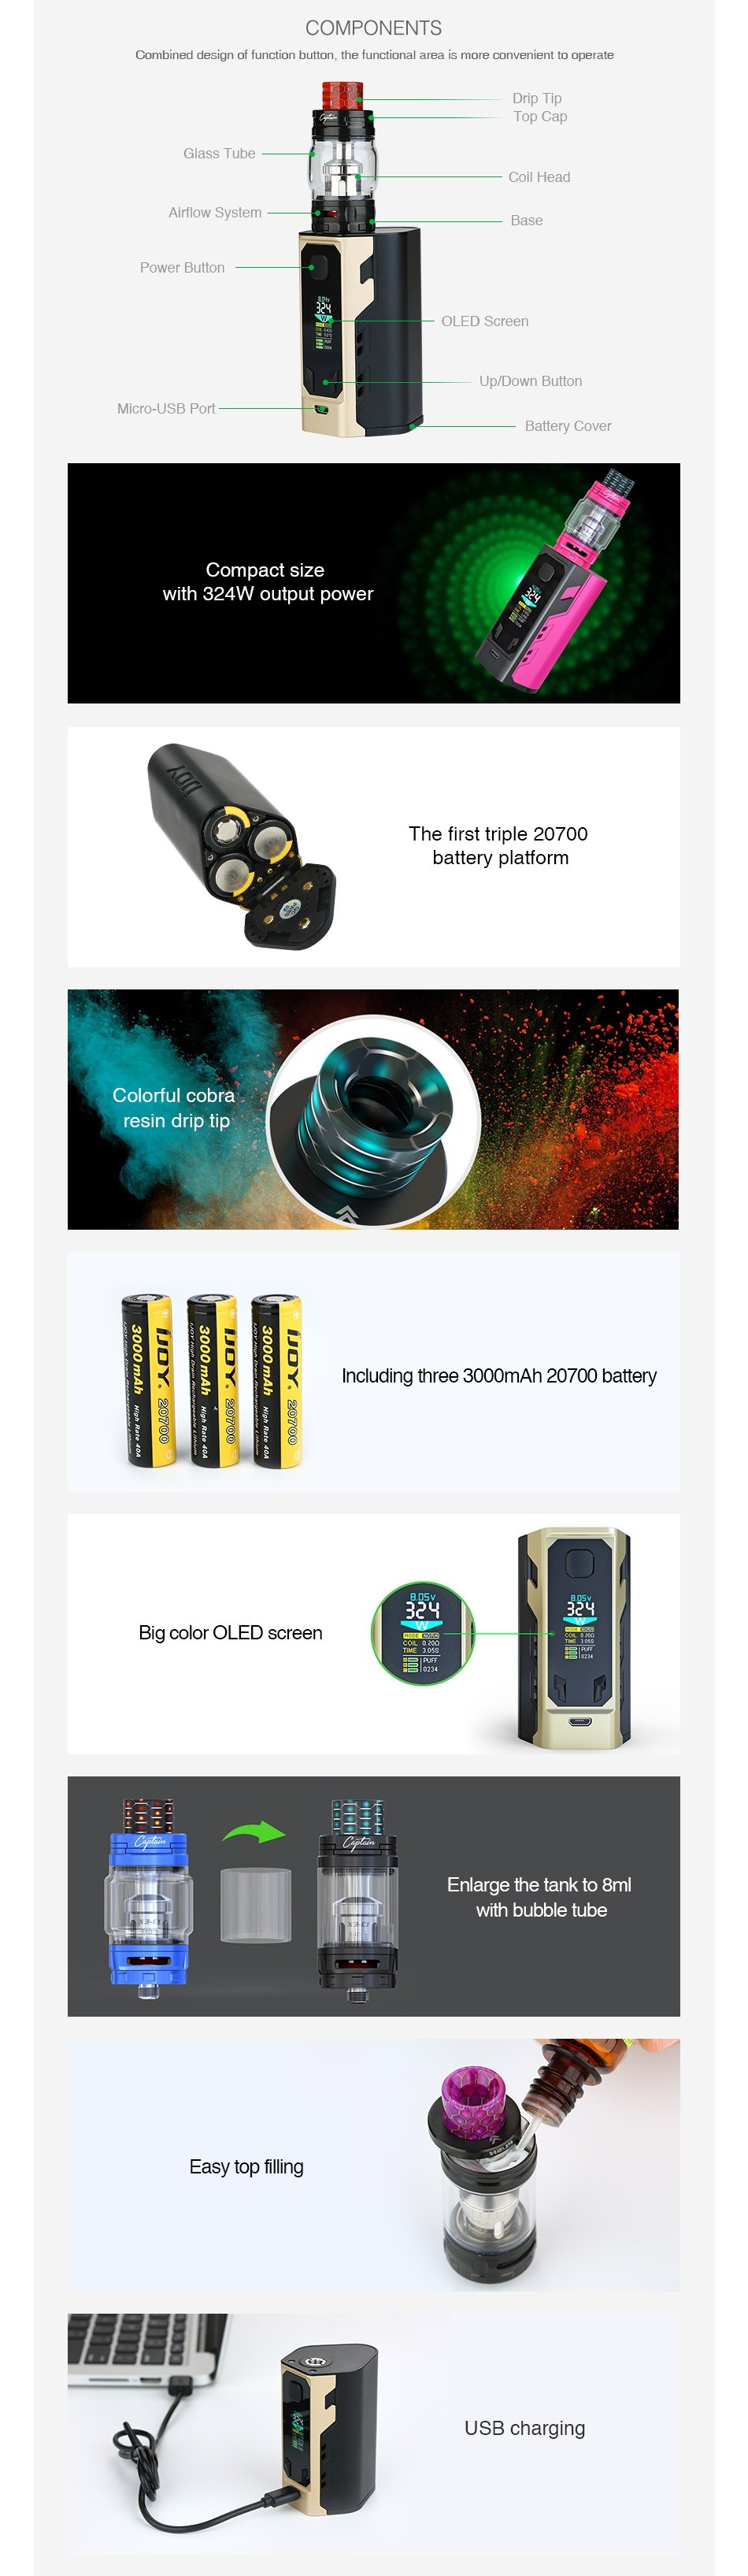 IJOY Captain X3 324W 20700 TC Kit 9000mAh COMPONENTS miner reson m niton the functional area is more convenient to nnpratP Coil He Airflow Systcm Power Button    Down Button Compact size ith 324W output power The first triple 20700 Colorful cobra resin drip Including three 3000mAh 20700 battery g color OLED screen Enlarge the tank with bubble tube USB charging